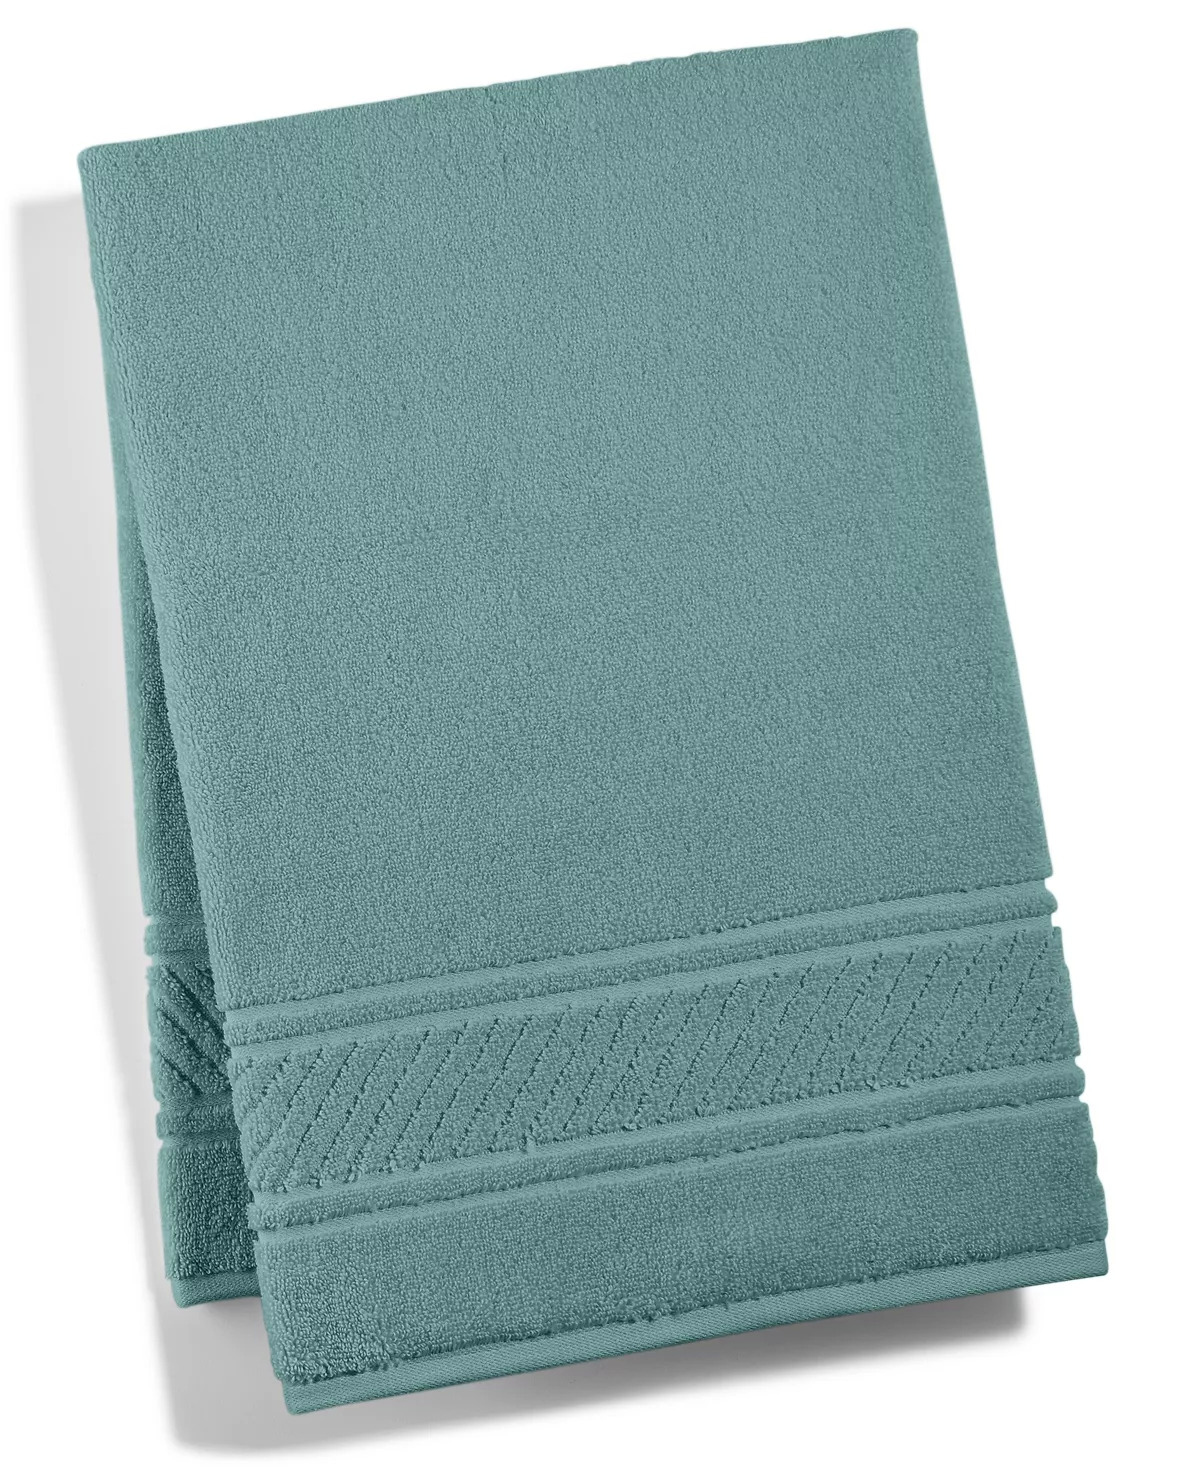 You Can Score Martha Stewart Towels At Macy's for $3.99 (regularly